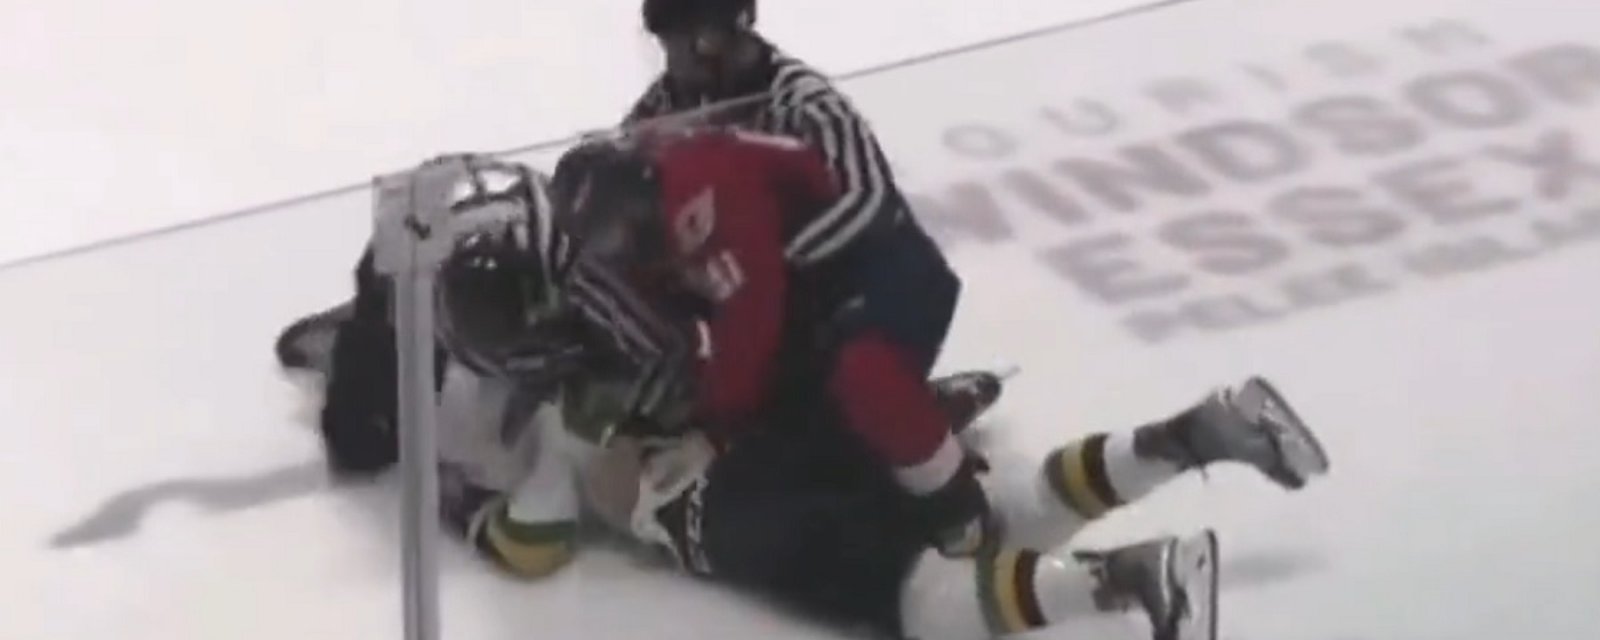 Controversial Habs draft pick Logan Mailloux gets destroyed by Pasquale Zito.